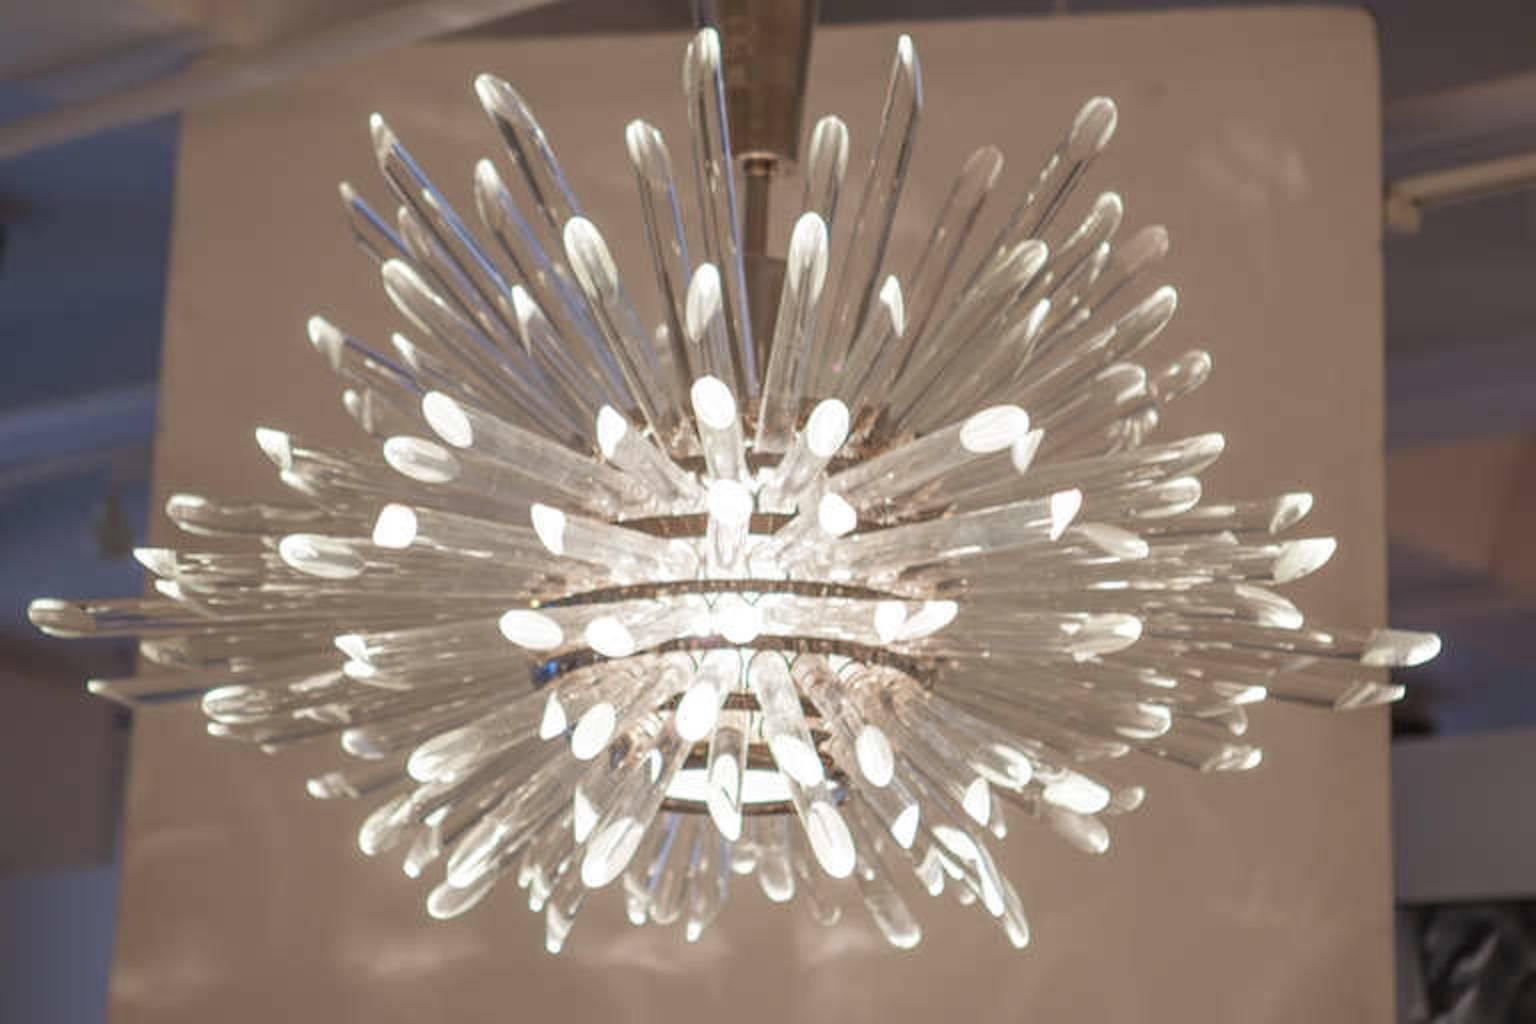 Modernist large breathtaking crystal Sputnik chandelier made from seven layers of glass rods with beveled tips on a polished nickel stem with canopy. Measures: Crystal body is 24 inches tall.